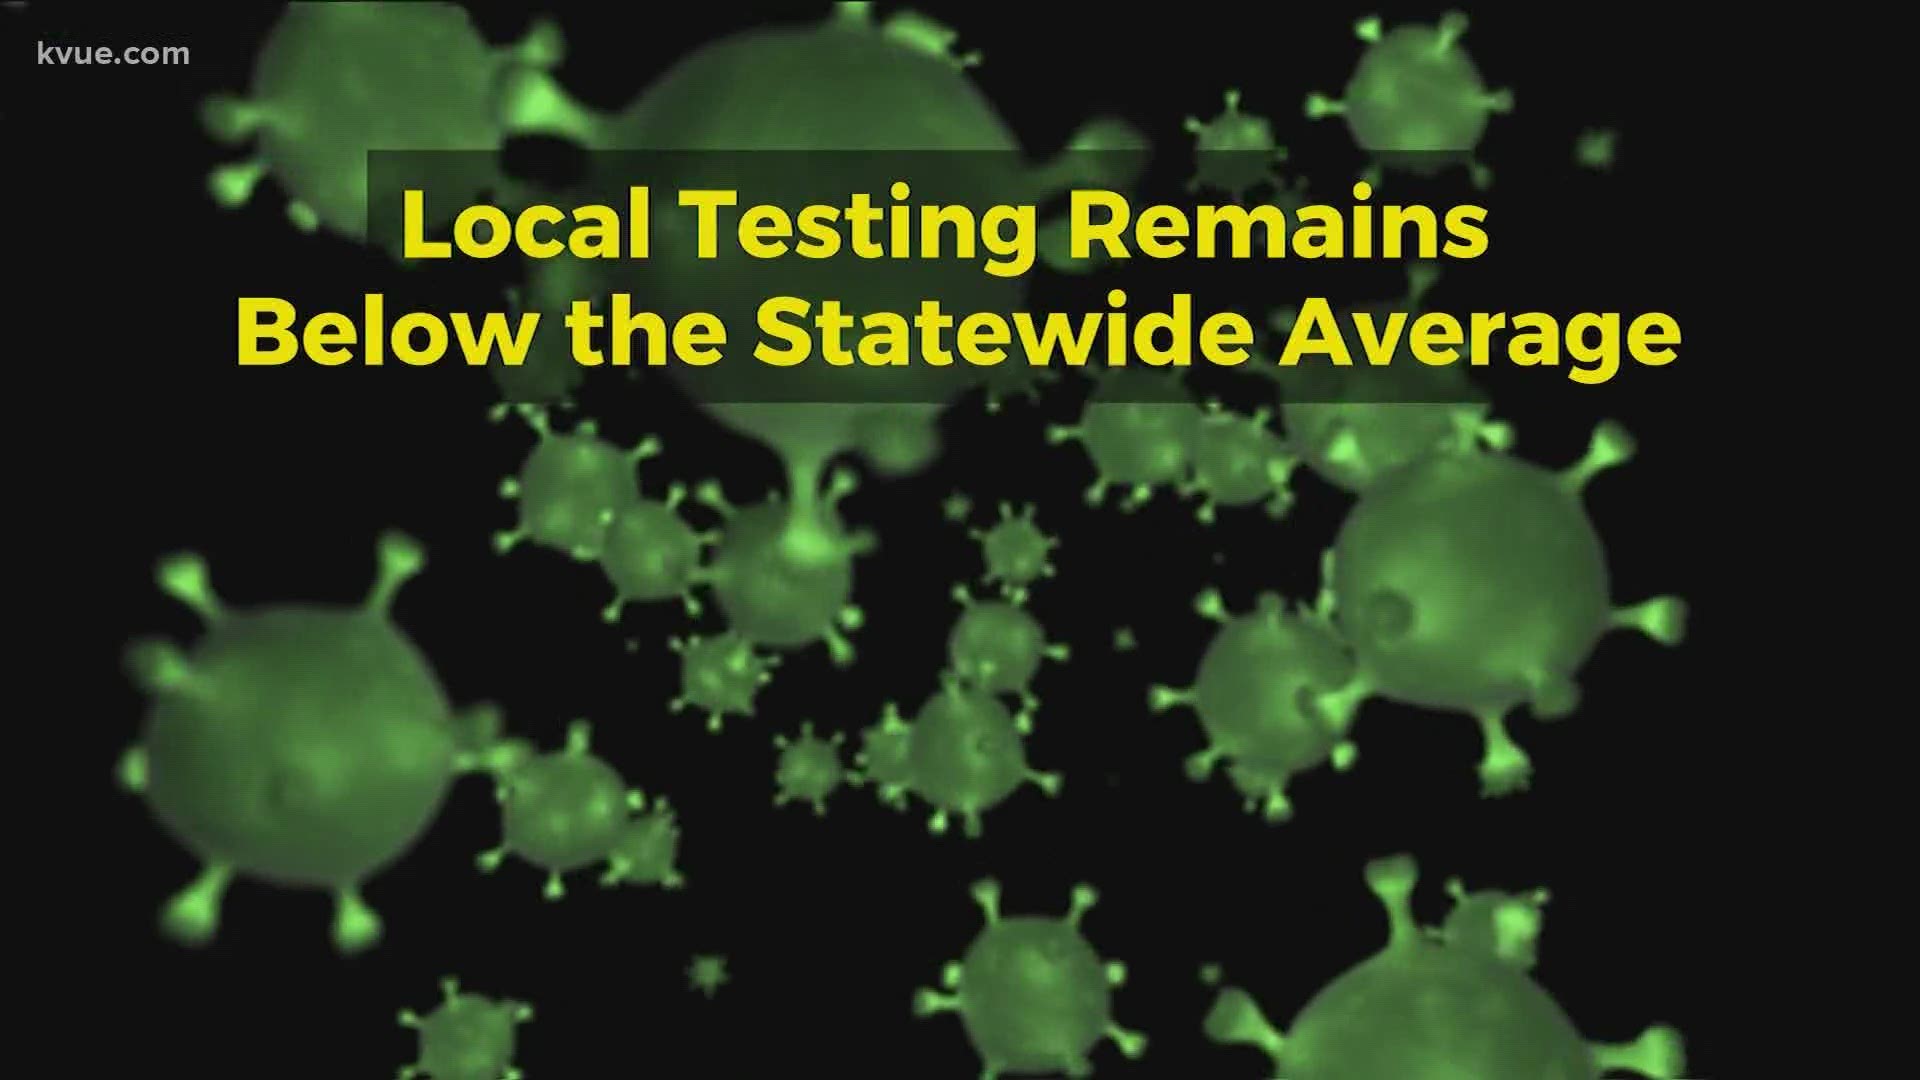 The governor said about 25,000 Texans are being tested for the virus each day.